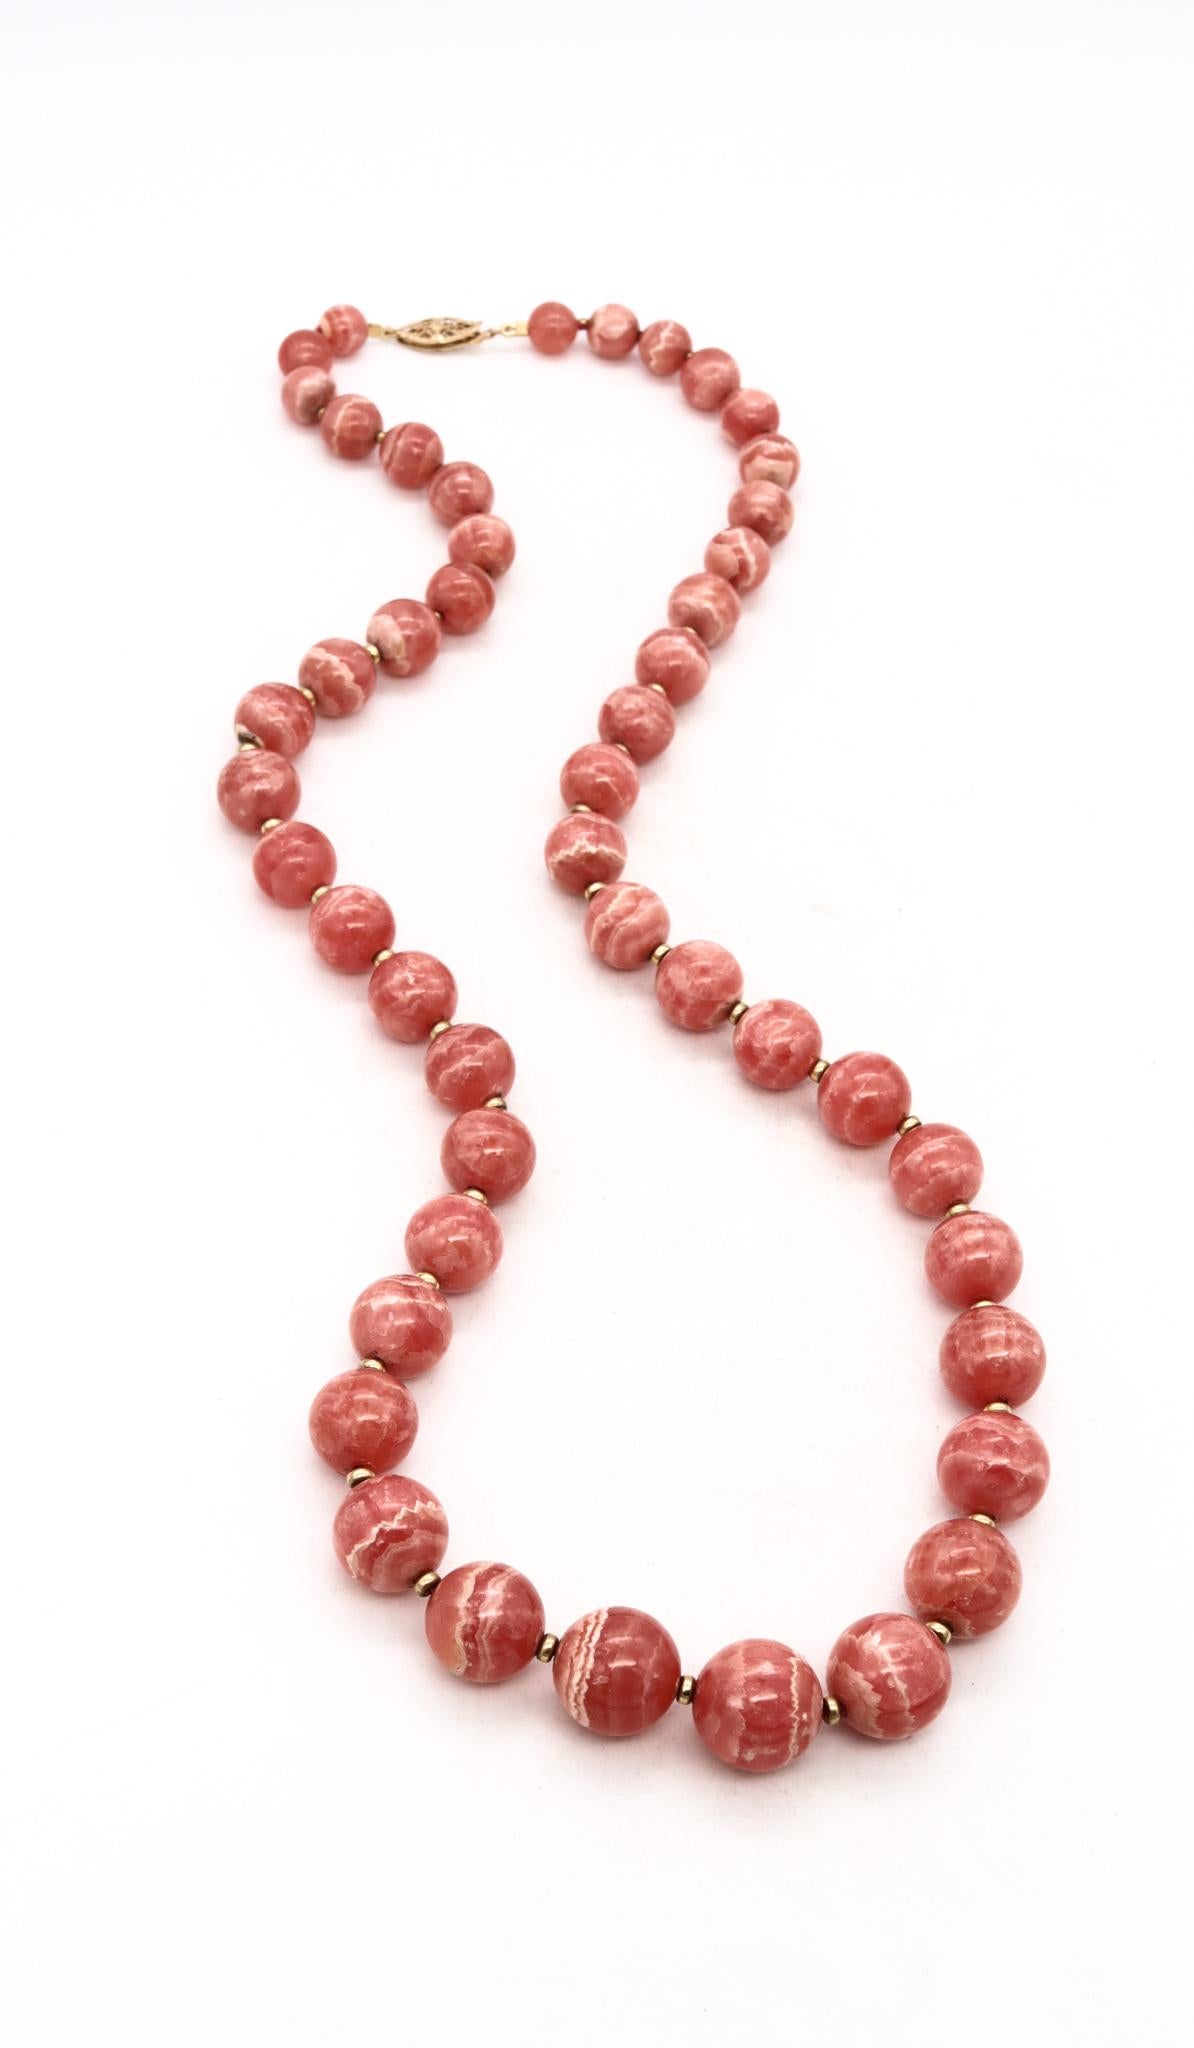 Rhodochrosite Graduated Necklace in 18Kt Gold with 645.25 Cts Superb Gemstones For Sale 2